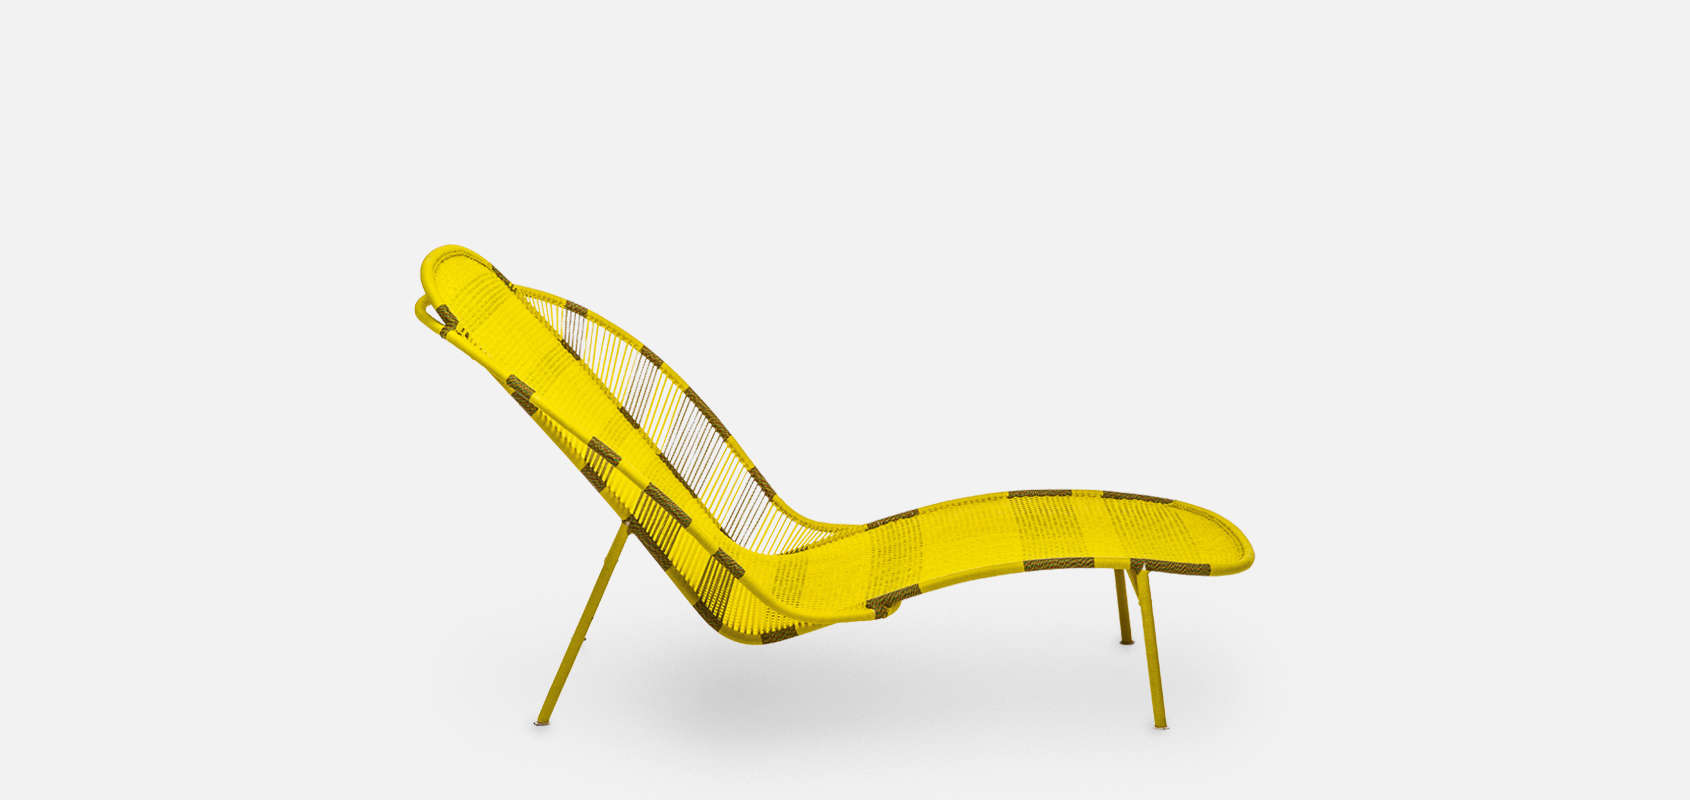 M'Afrique Collection: Imba Chaise Lounge